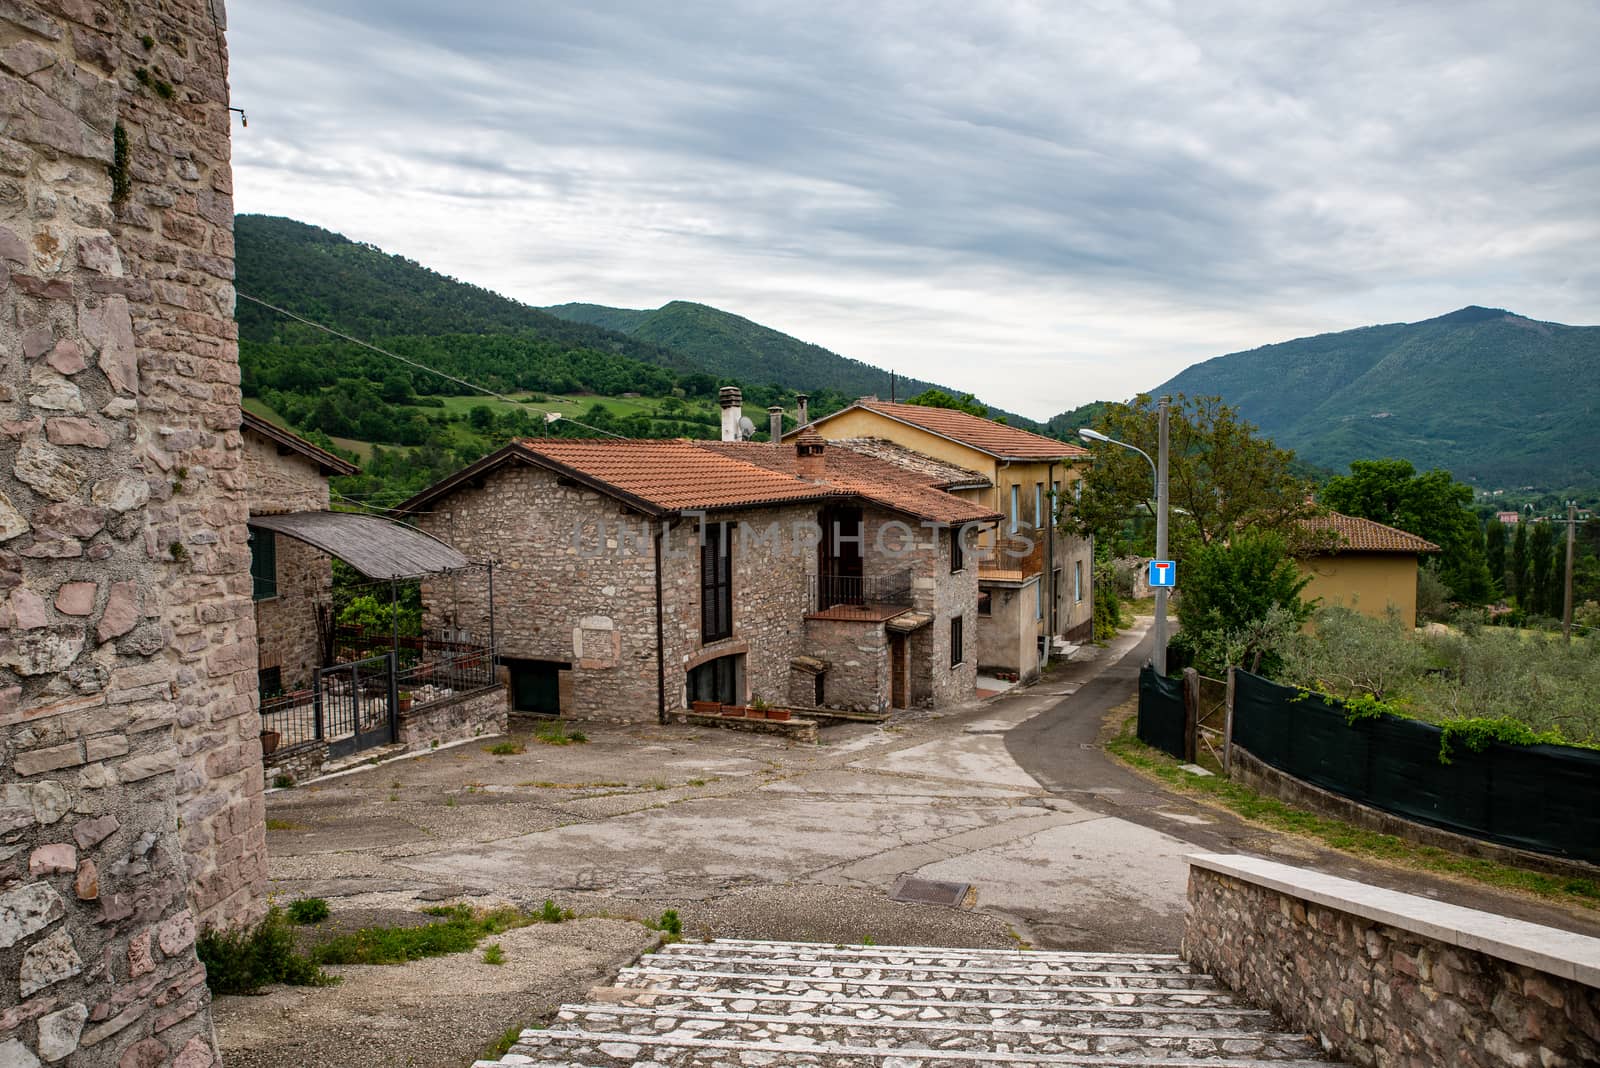 the town of PoarzanoIN THE SERRA VALLEY by carfedeph